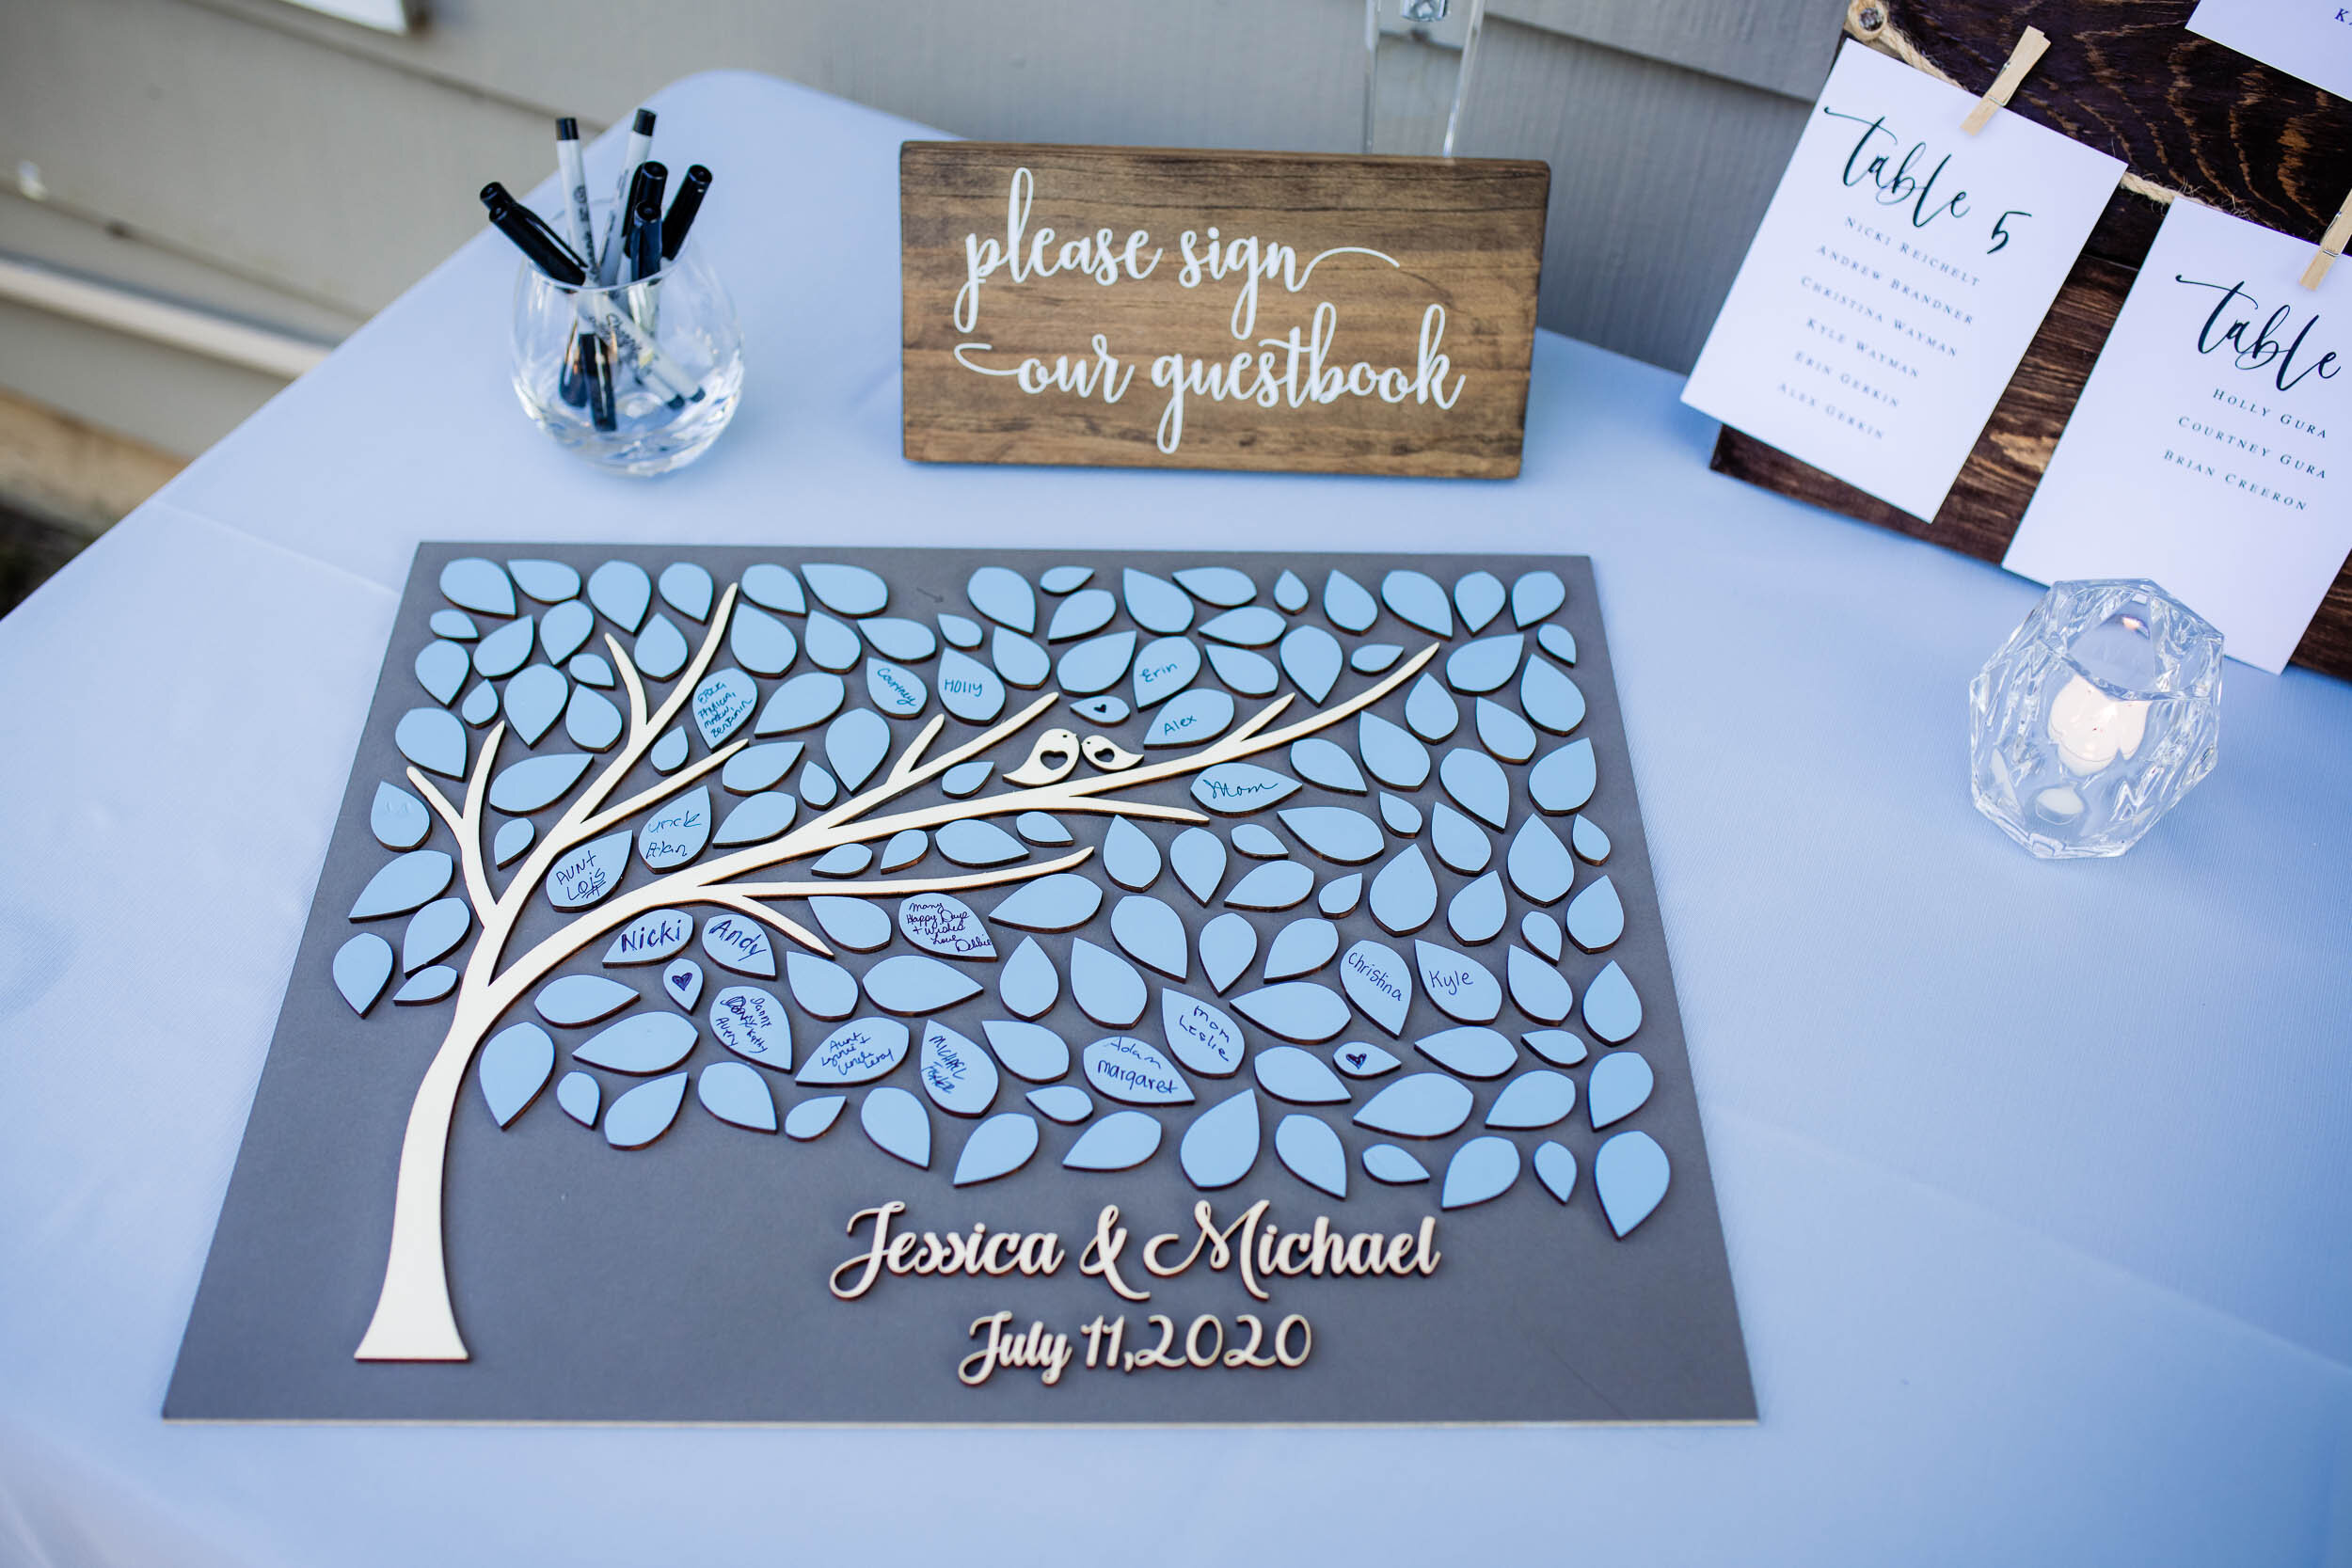 Creative sign in table:  Chicago backyard wedding photographed by J. Brown Photography.